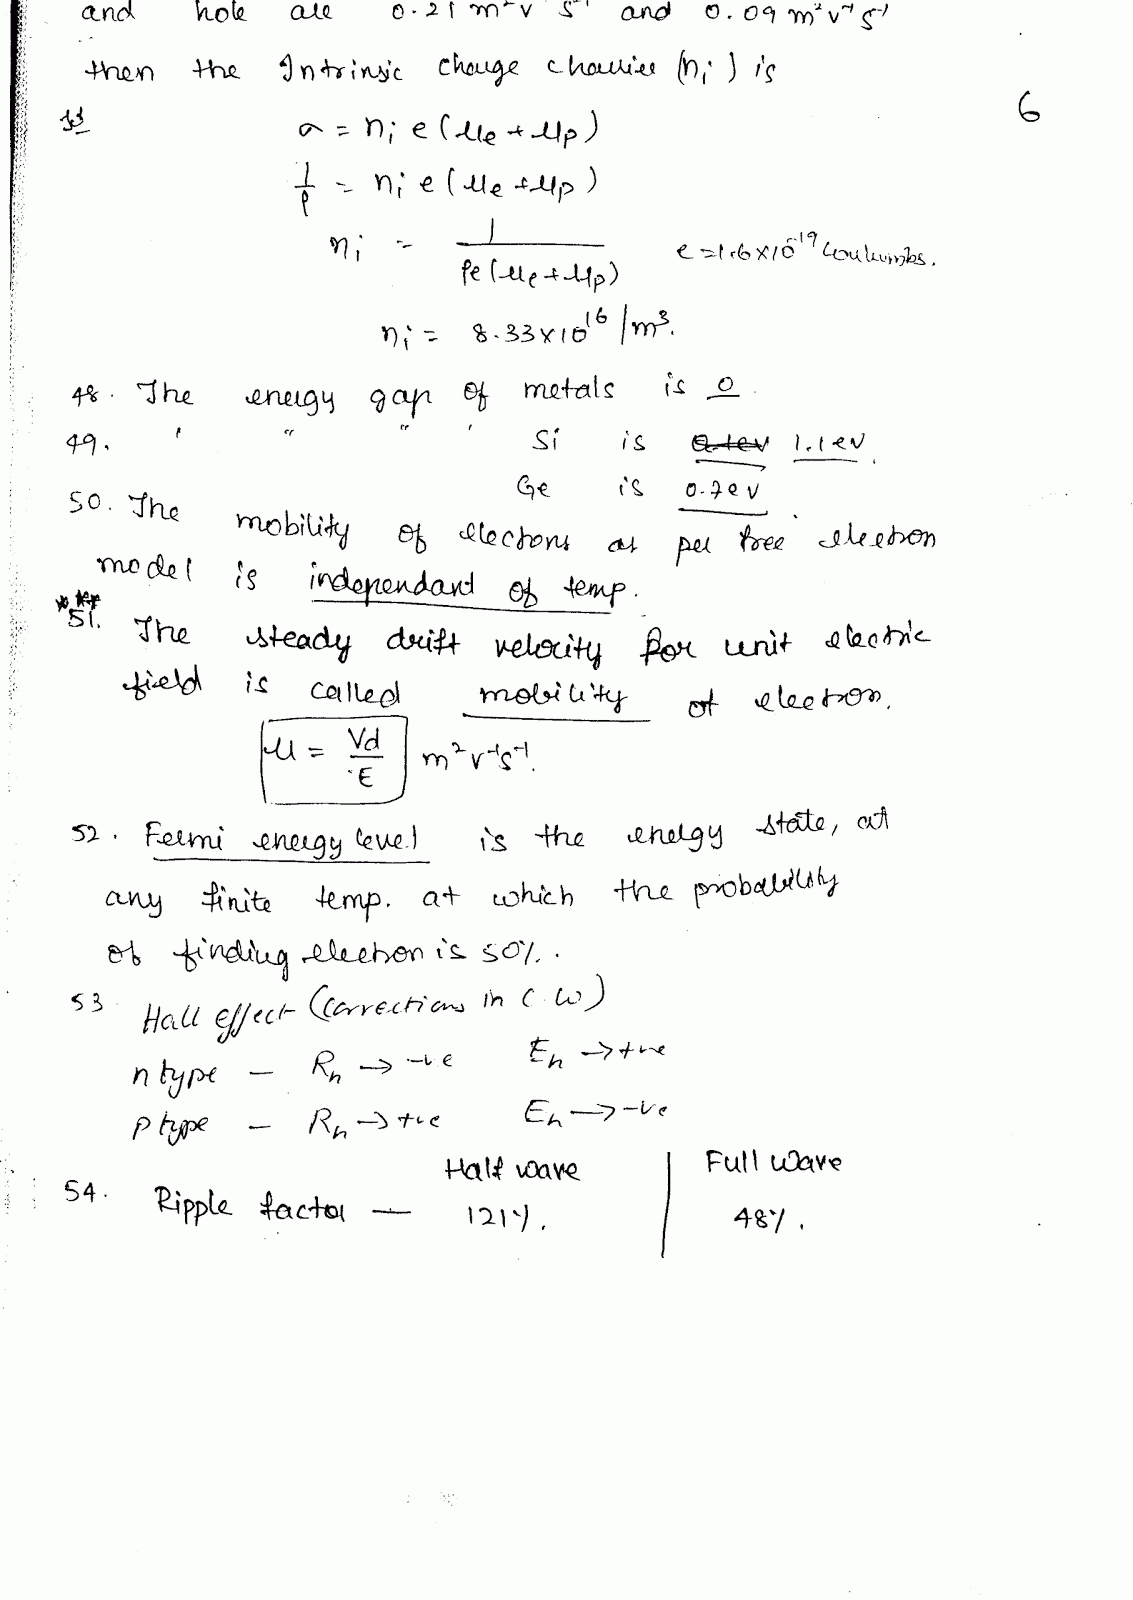 CMRIT ENGINEERING PHYSICS: II nd MID OBJECTIVE QUESTIONS 2012